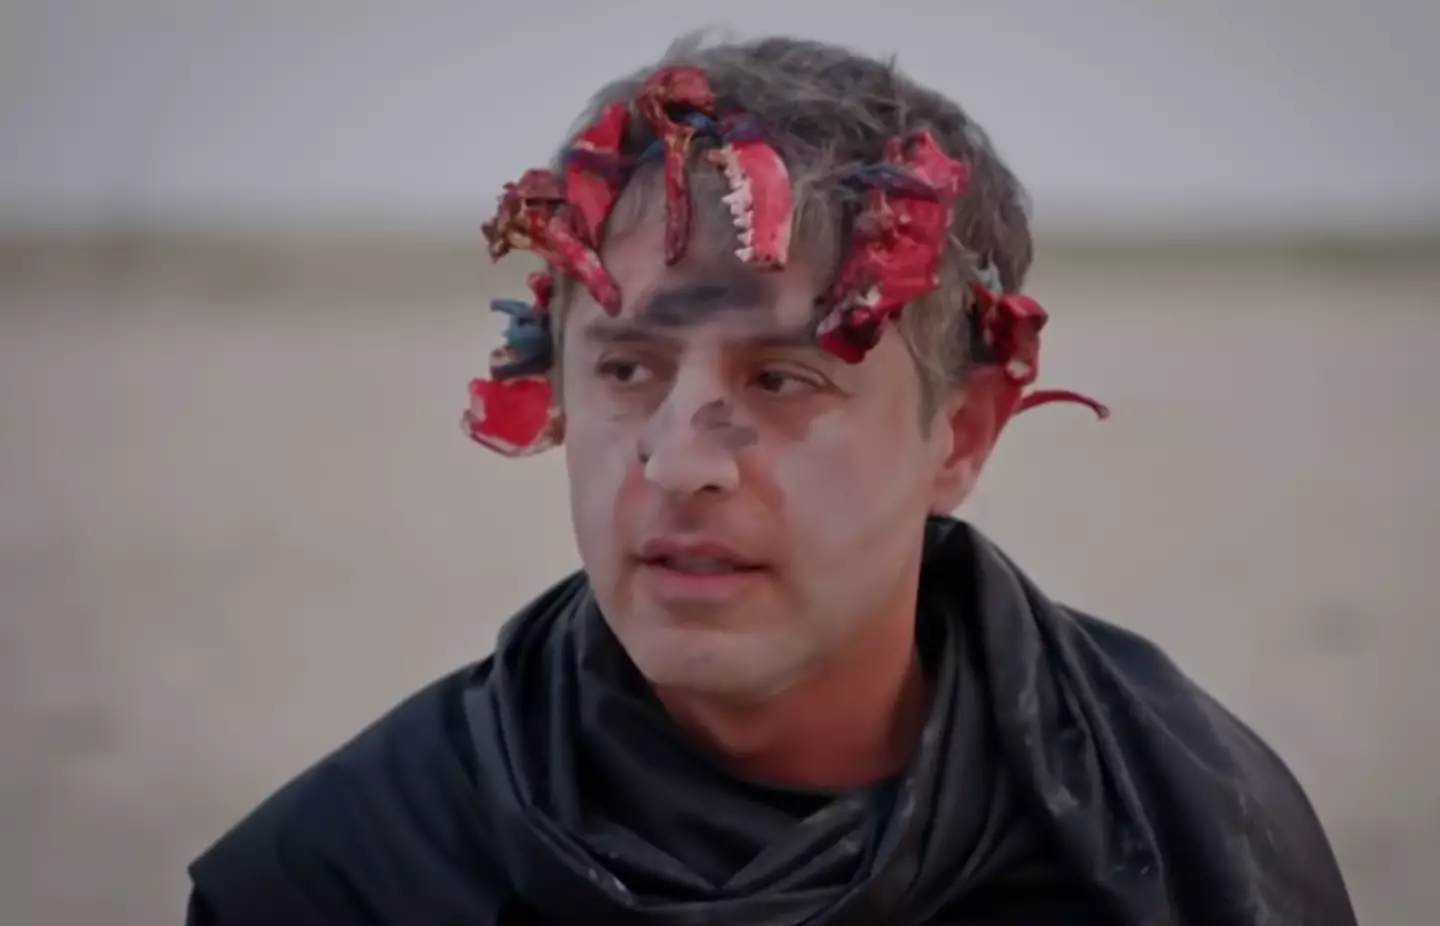 Reza Aslan visited a cannibalistic Hindu sect and was offered what was billed as a piece of human brain.